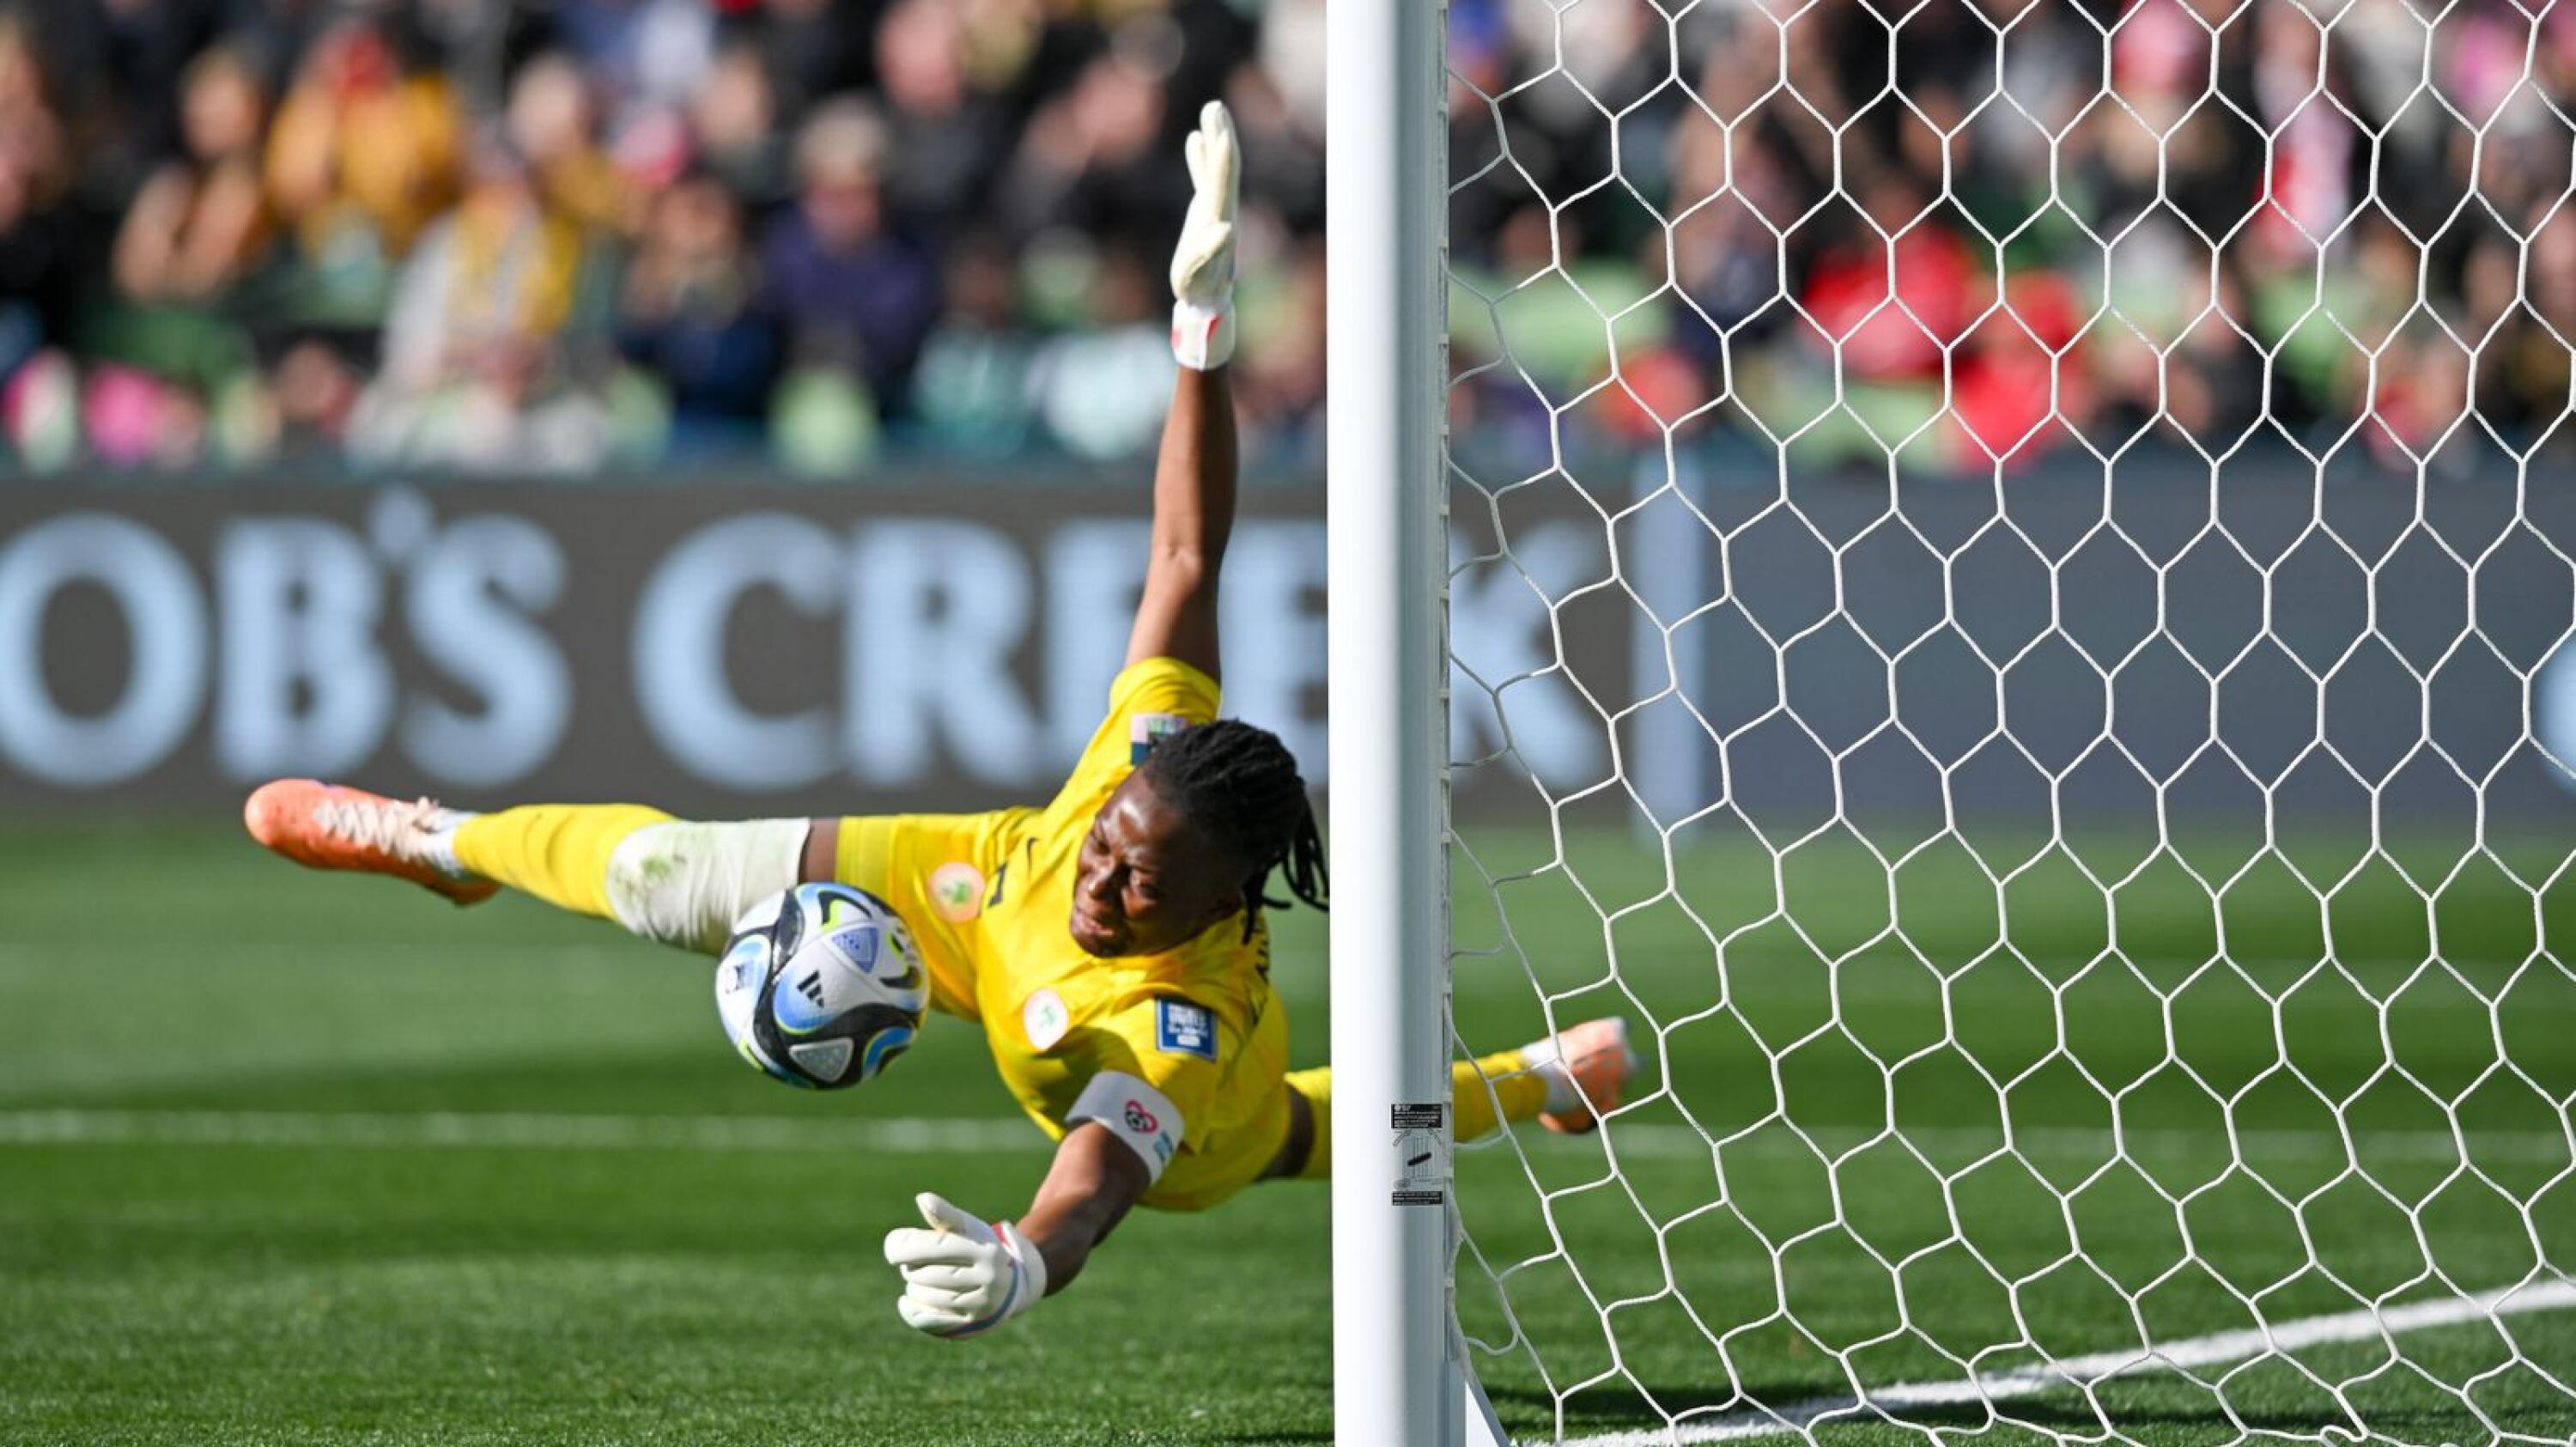 Nigeria's goalkeeper Chiamaka Nnadozie saves a penalty kick by Canada's forward Christine Sinclair during the Fifa Women's World Cup Group B football match at Melbourne Rectangular Stadium, also known as AAMI Park, in Melbourne